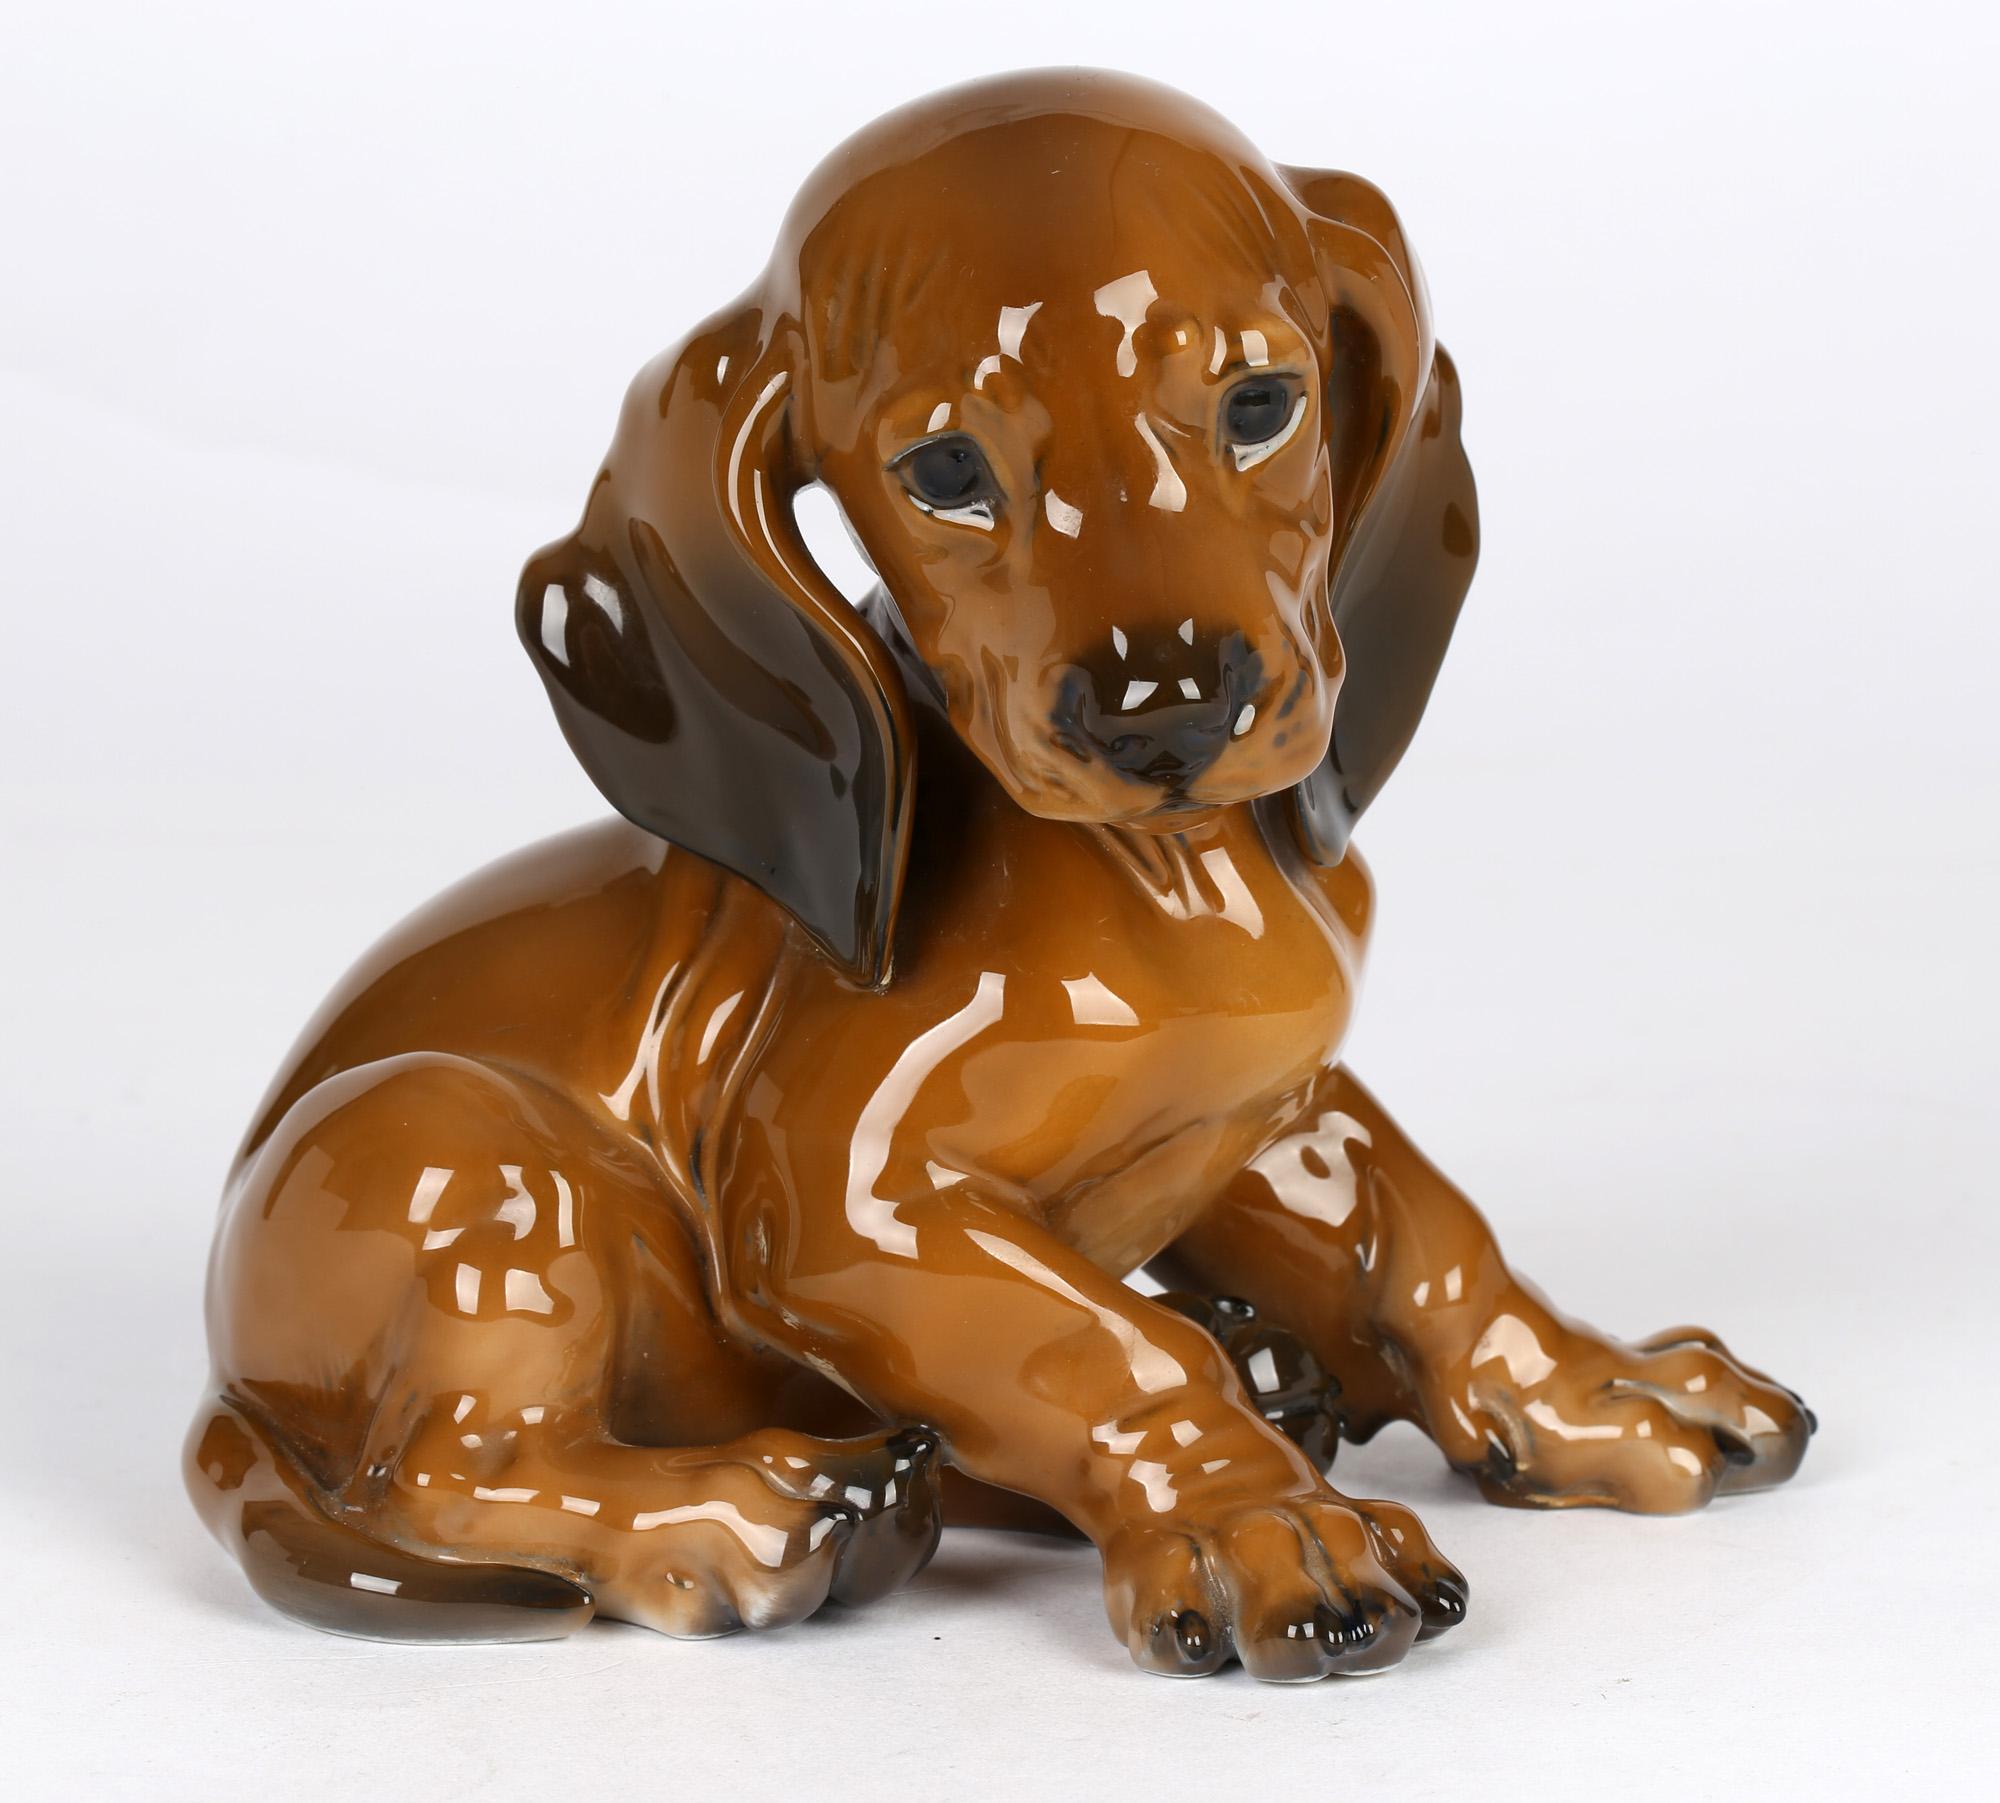 A finely made German mid-century porcelain figure of a dachshund puppy by Theodor Karner dating from the 1950/60's. The hand made figure is modeled seated on its hind legs with its head held to one side. It is beautifully modeled with wonderful